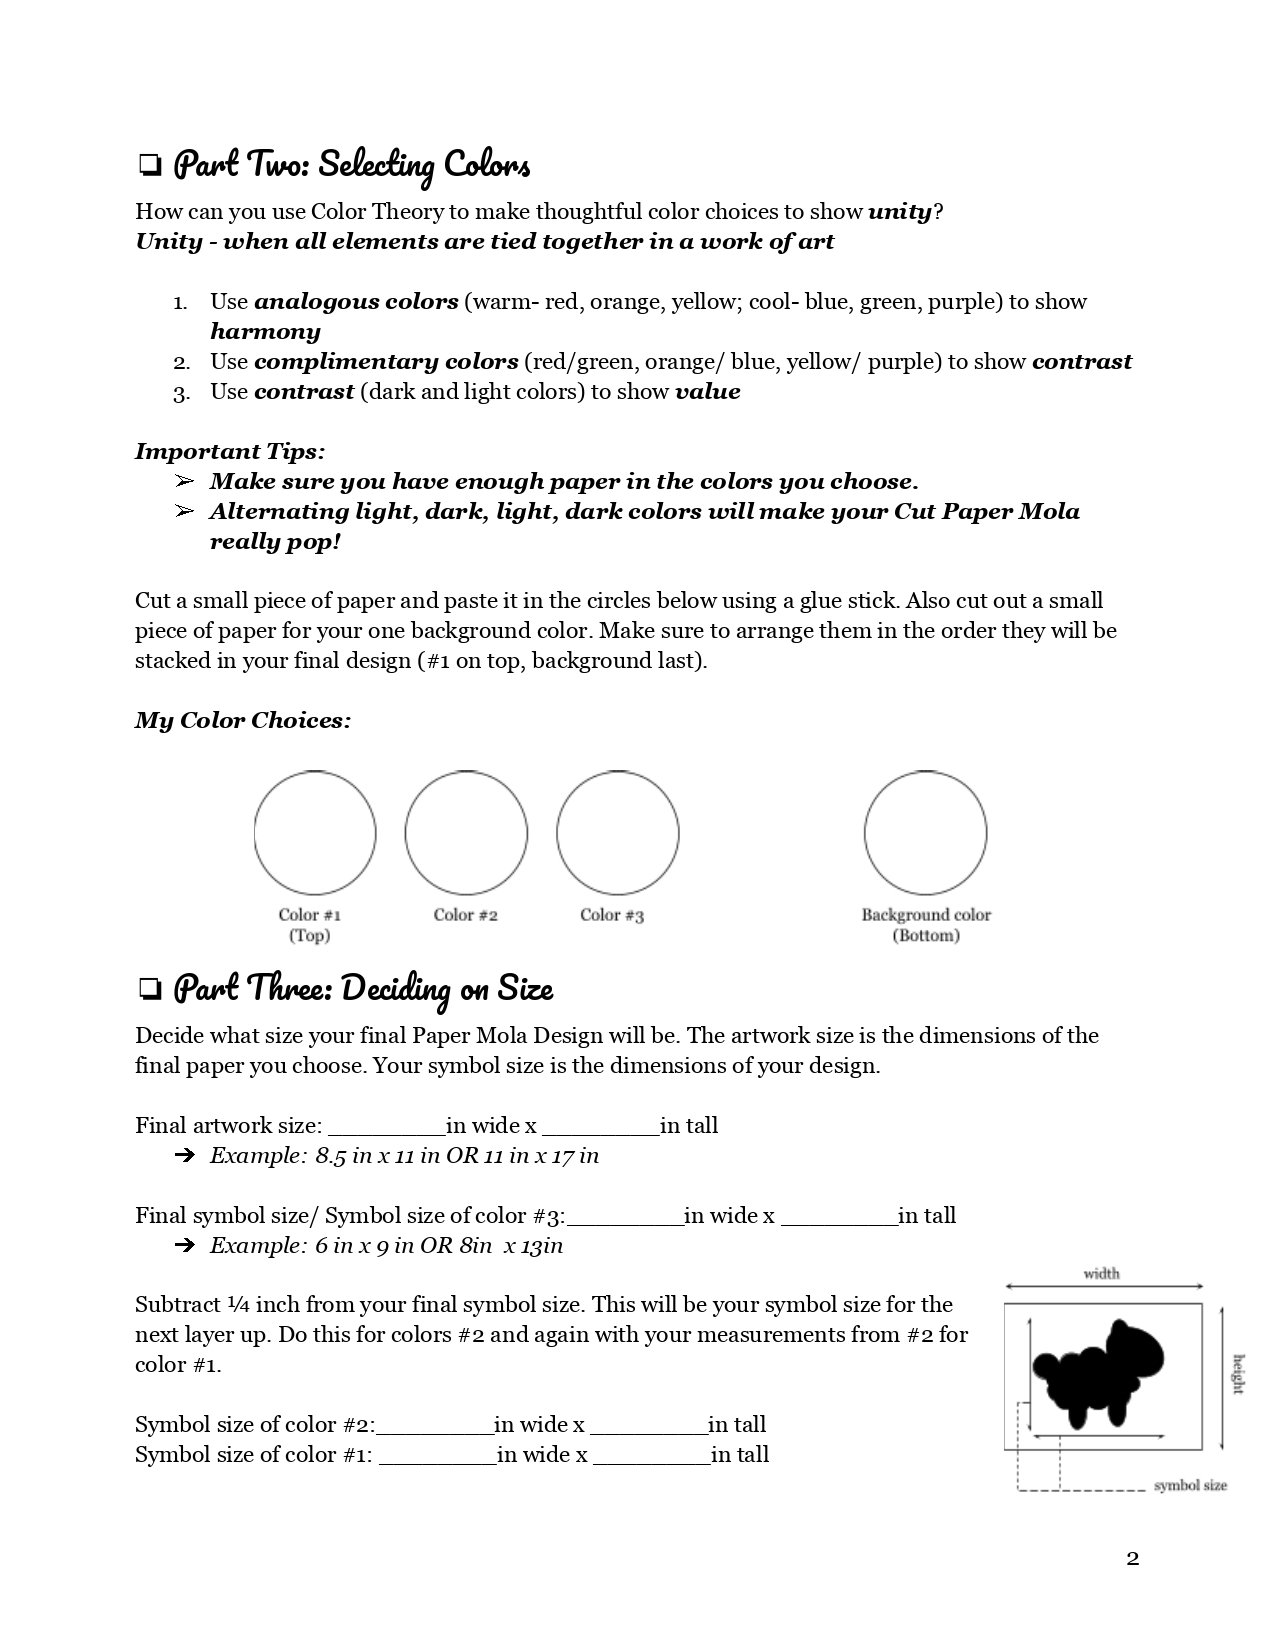 Paper Mola Handout Abby Klein_page-0002.jpg